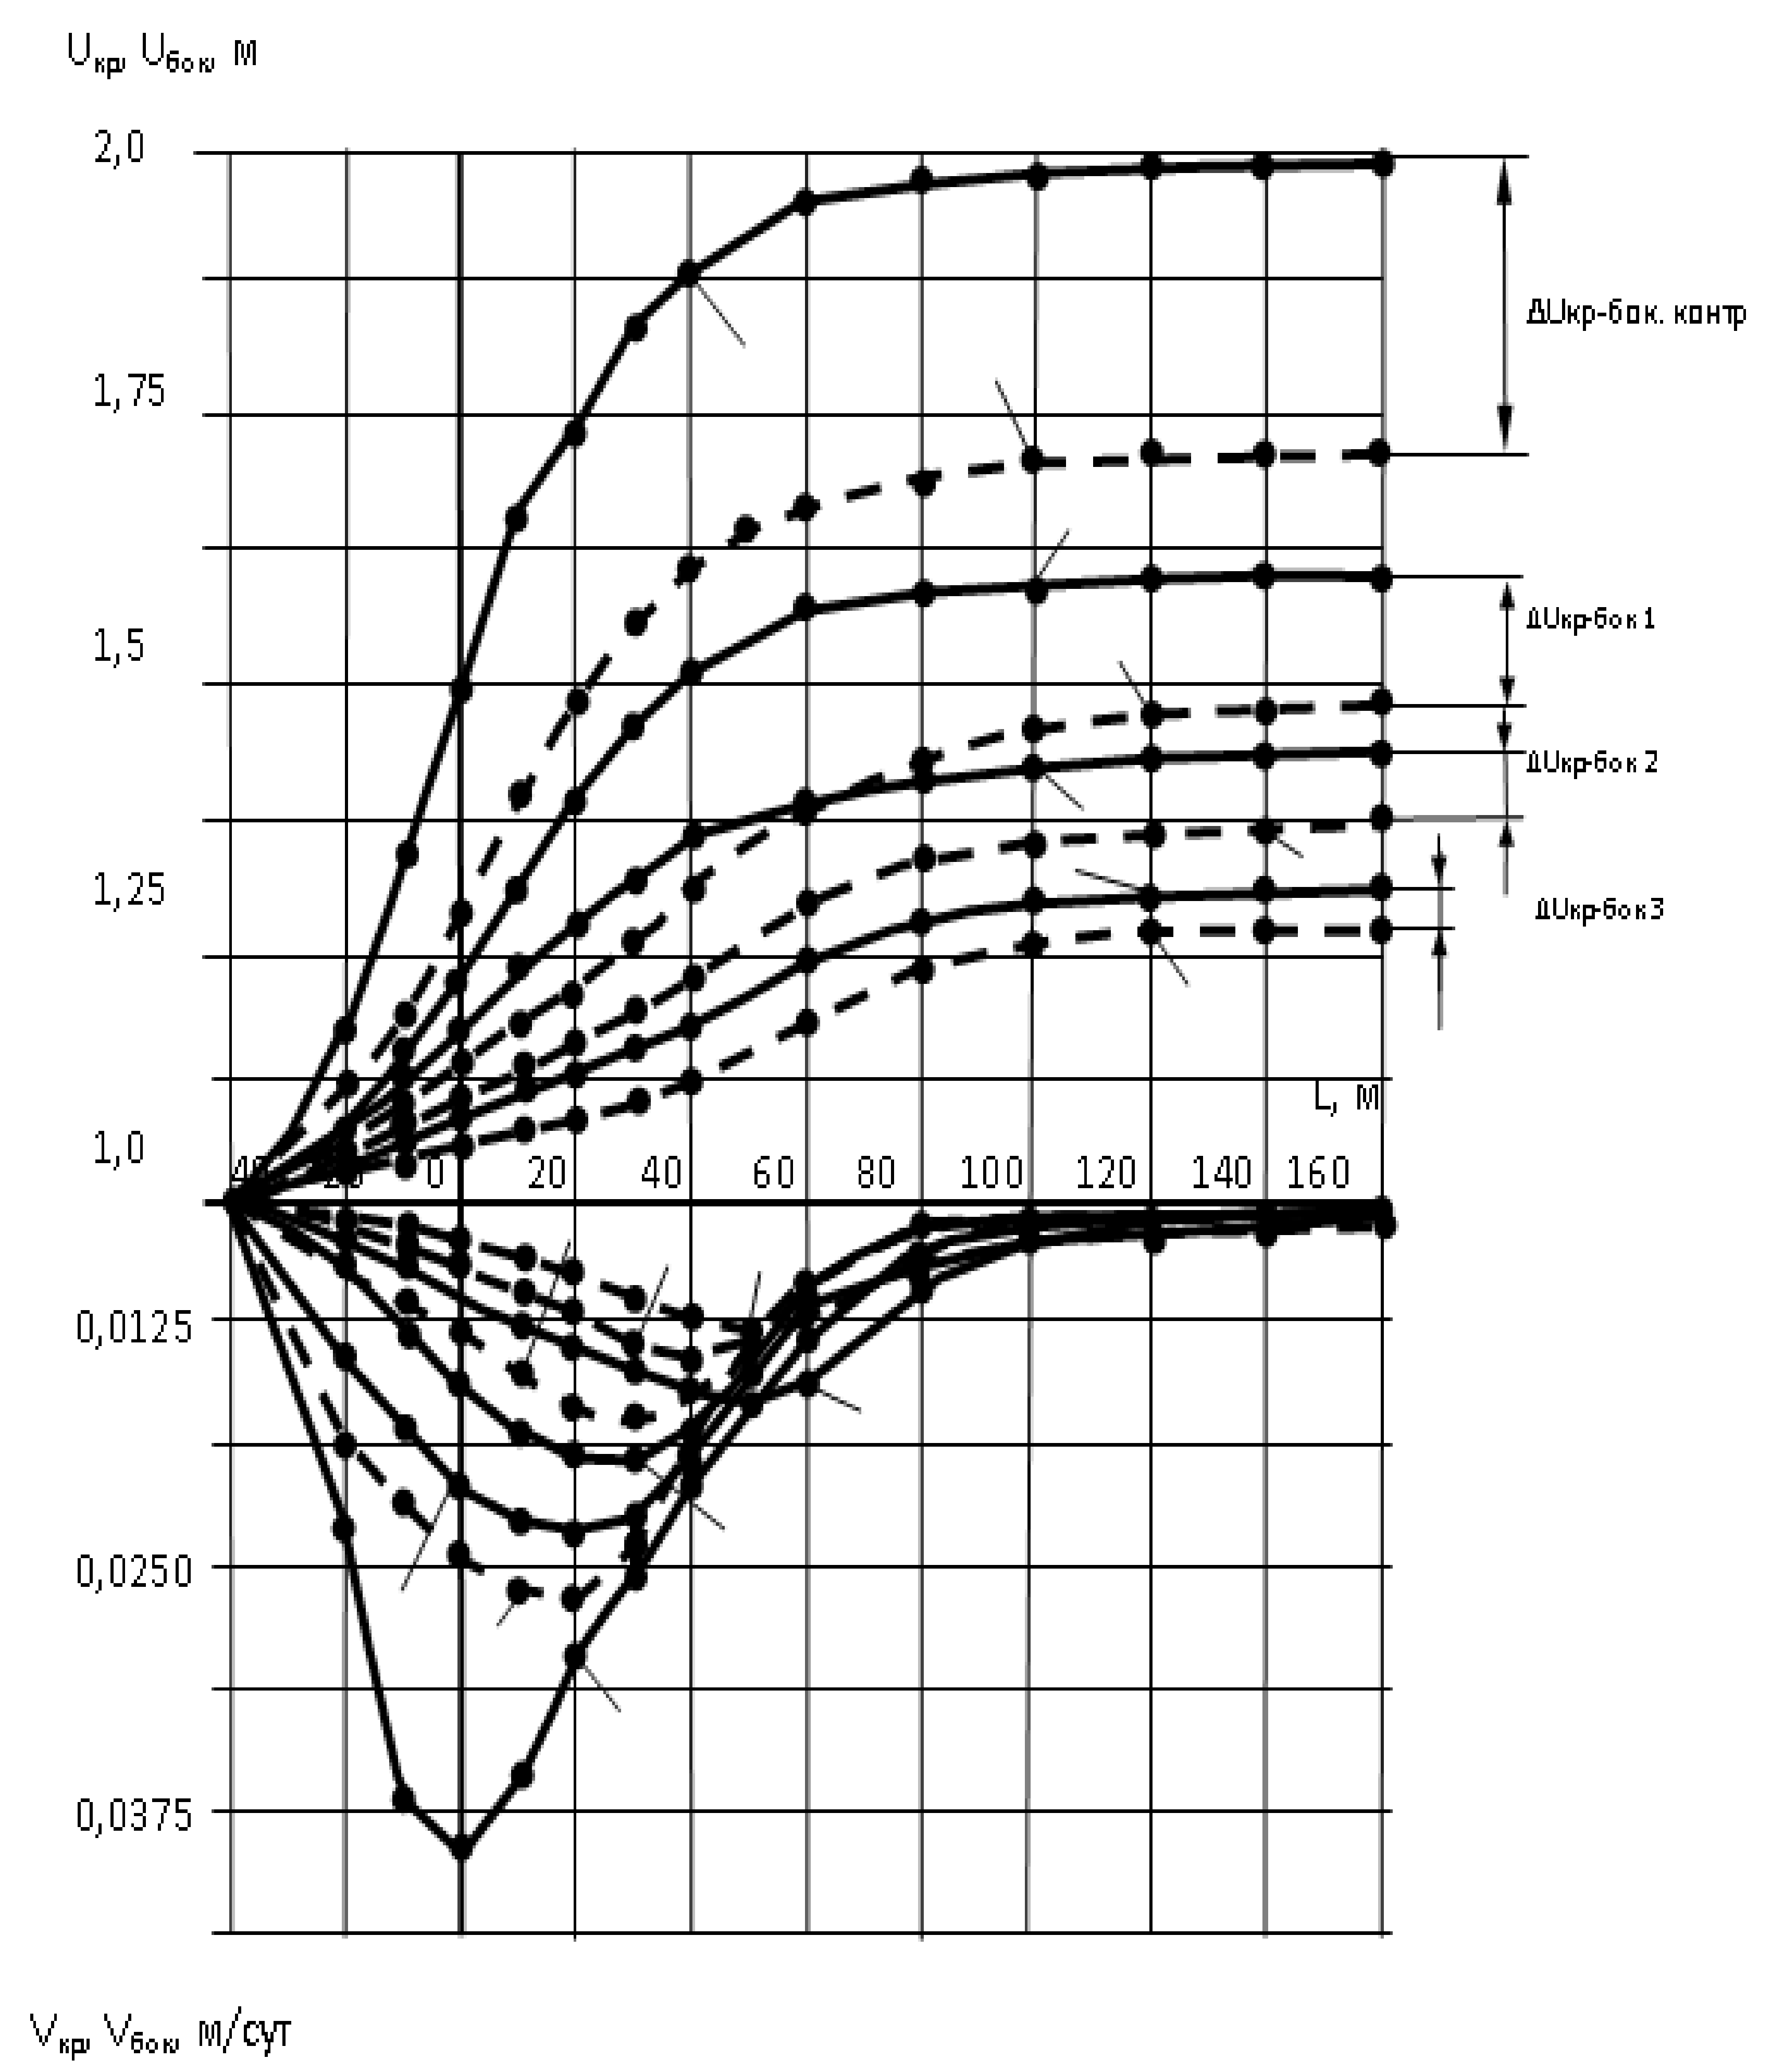  Dependency diagrams of vertical and horizontal displacement